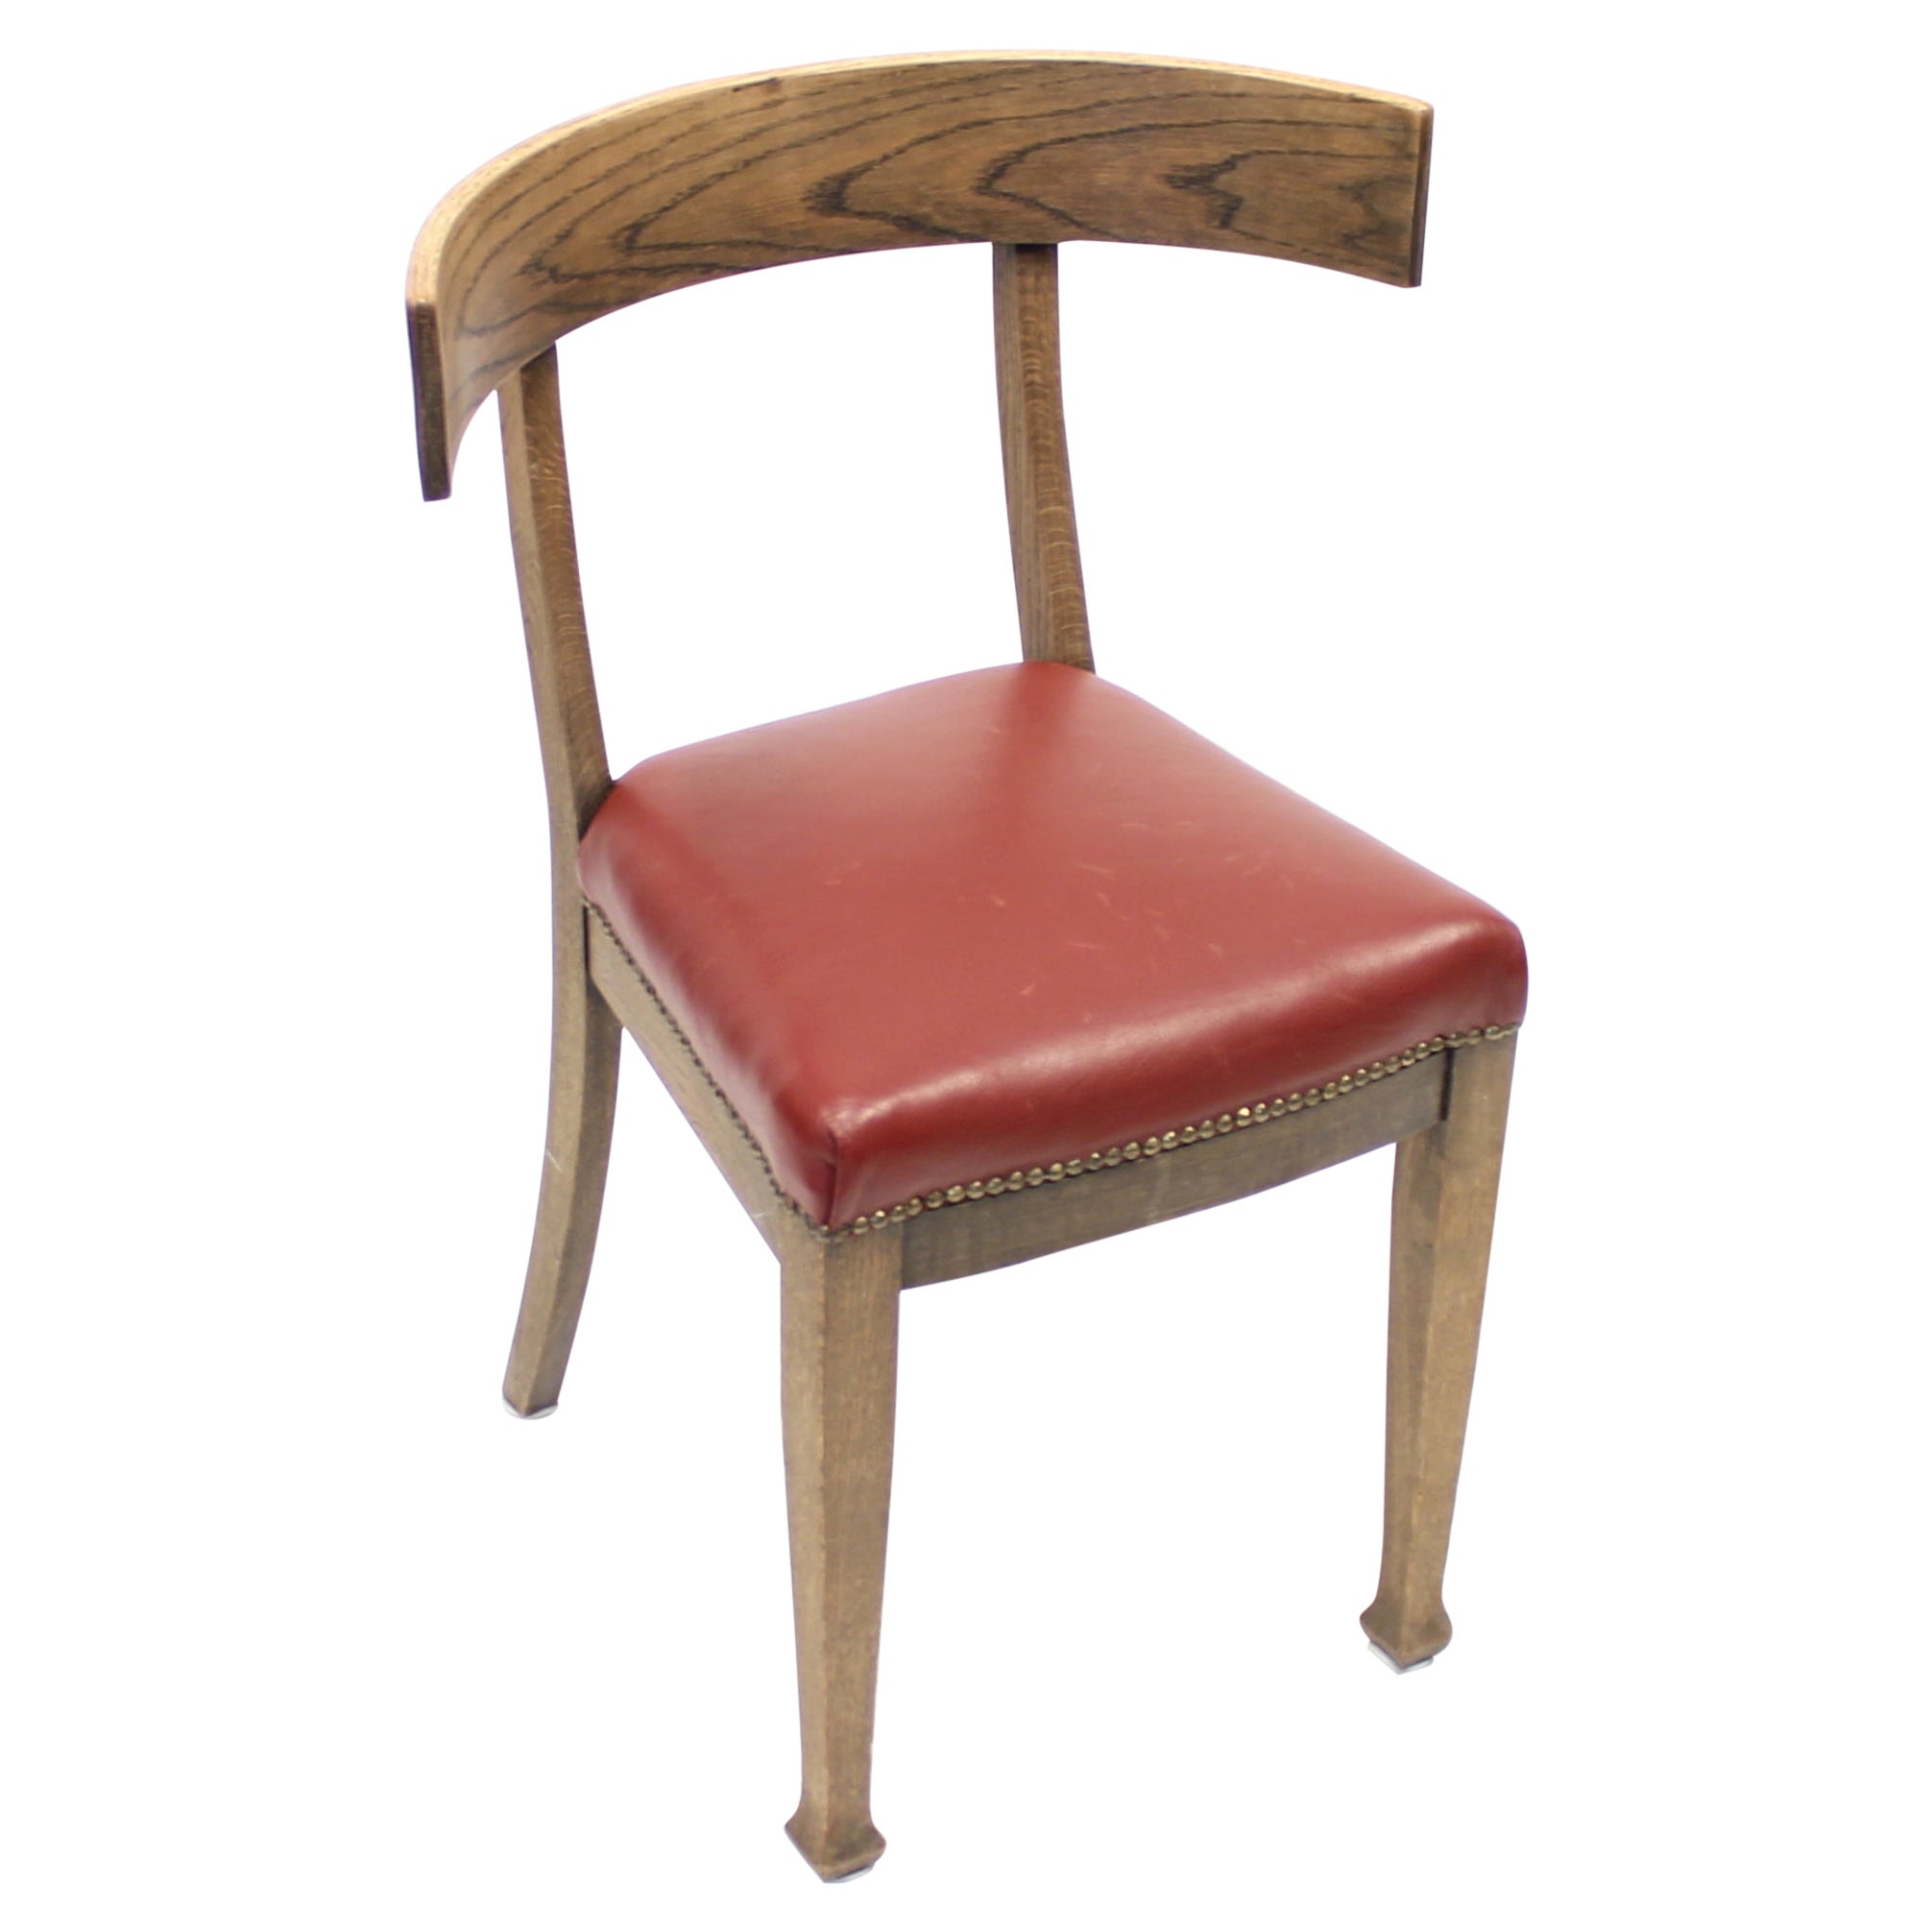 Oak and Leather Klismos Chair, Early 20th Century